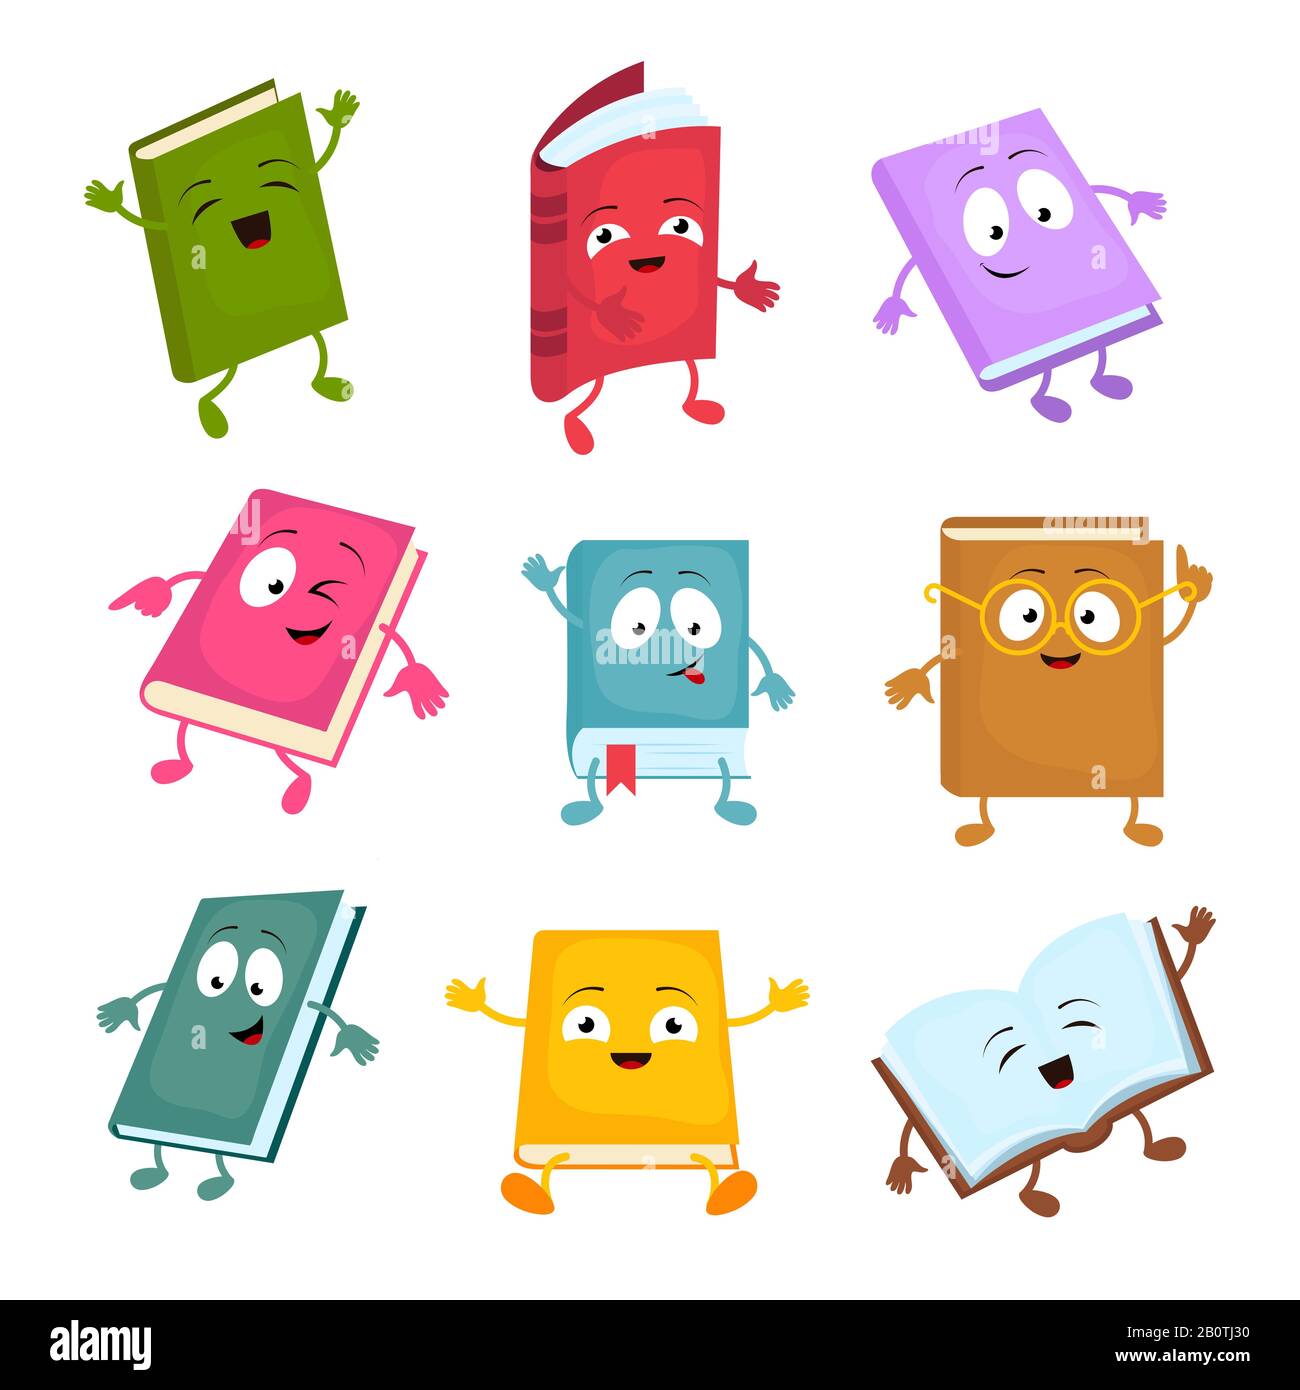 Funny and cute cartoon book vector characters. Happy library books mascots set. Character books cartoon illustration Stock Vector